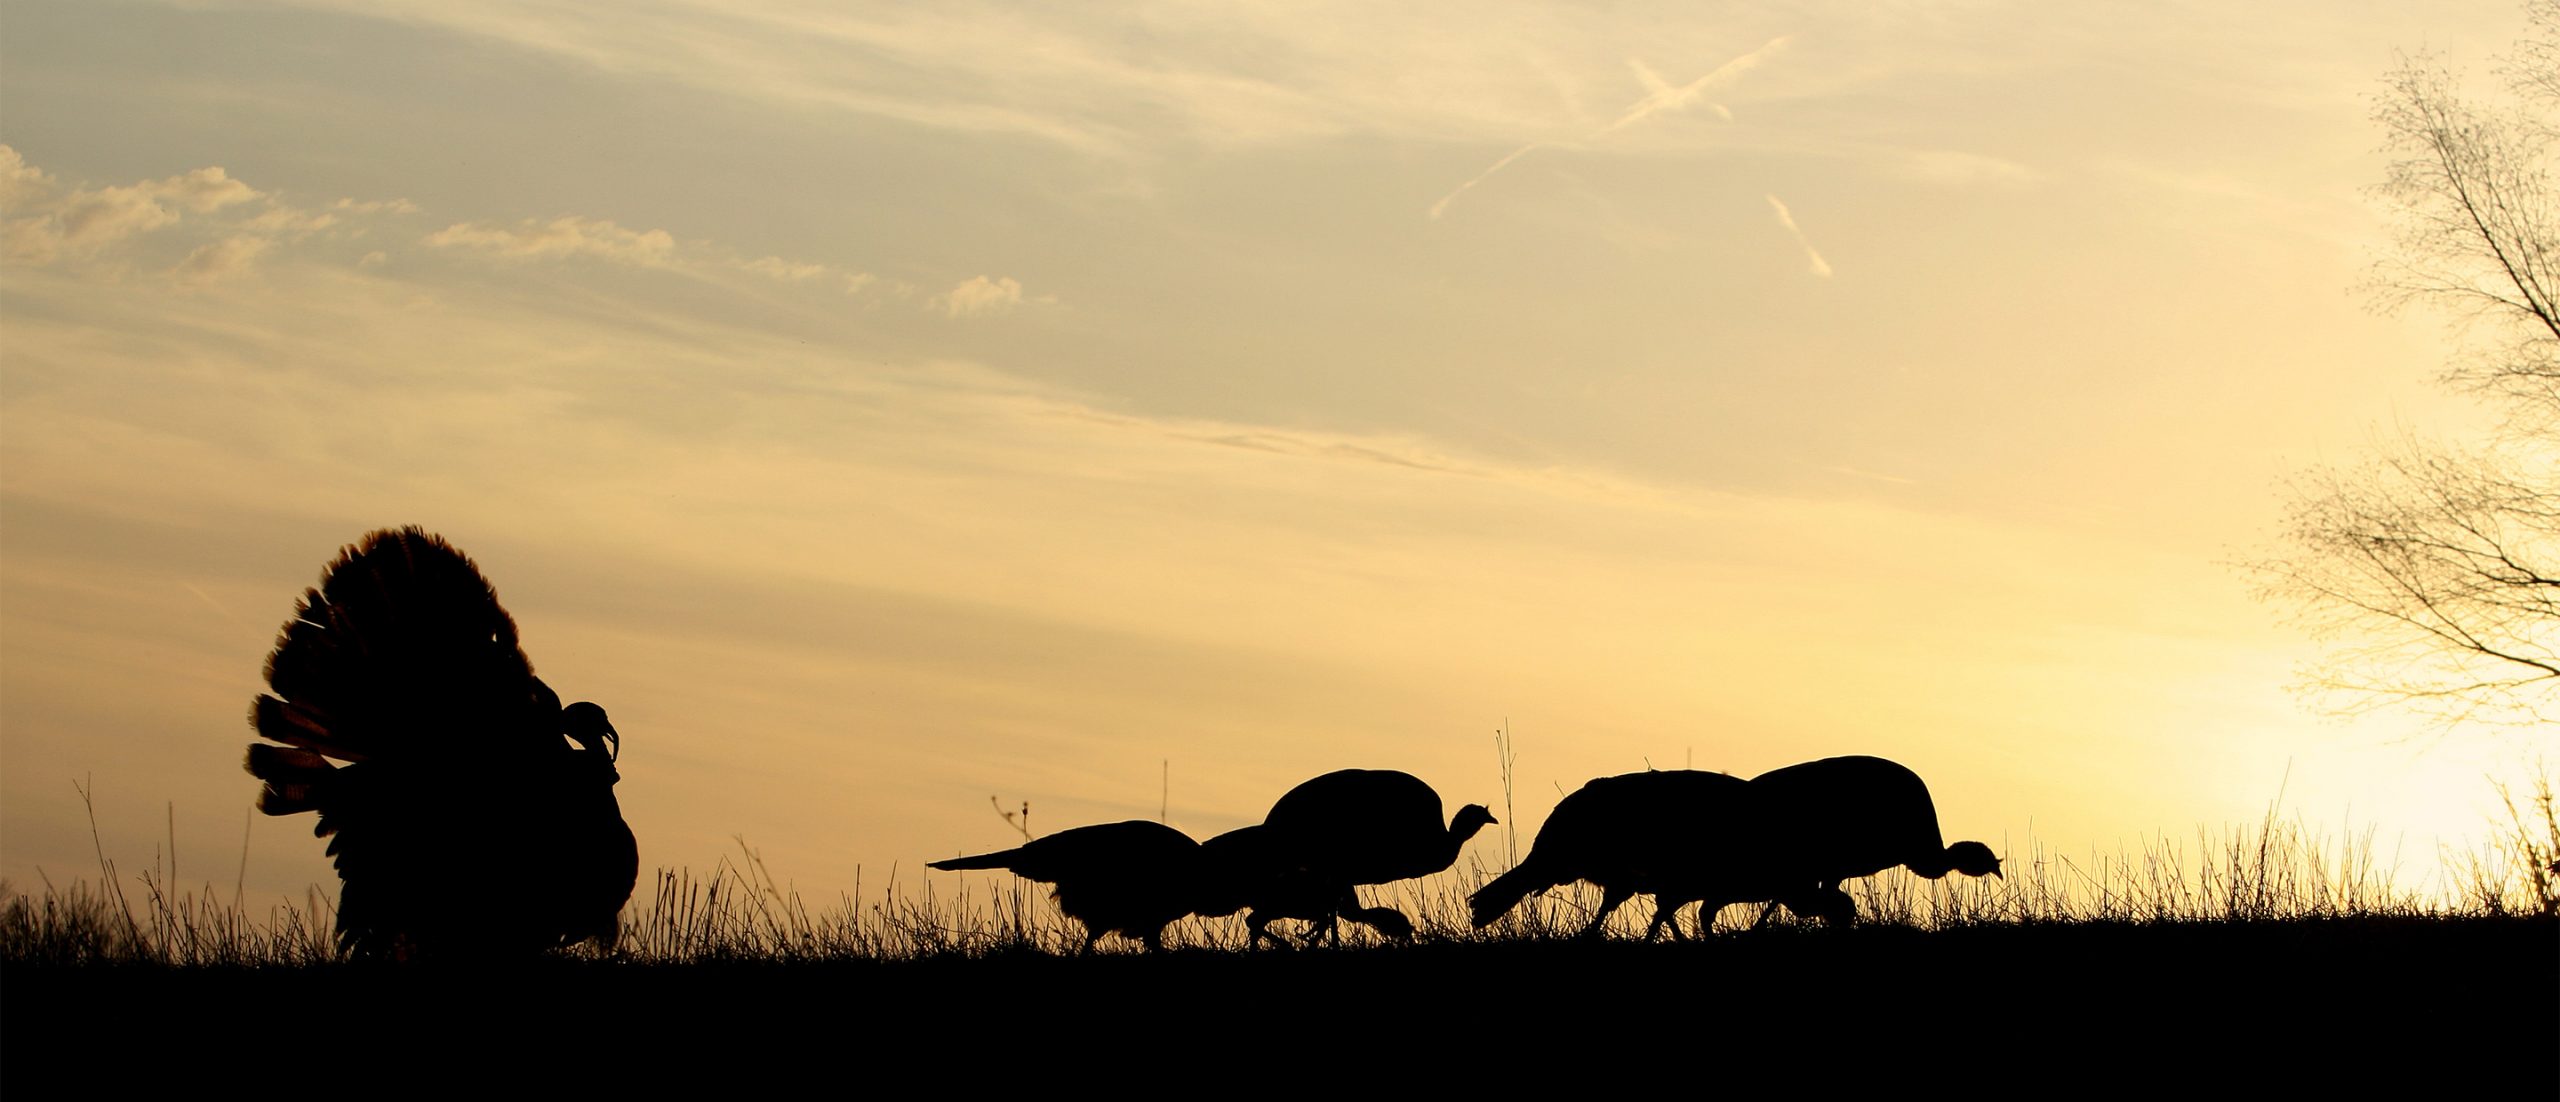 Silhouettes of wild turkeys walking during a fall sunset.